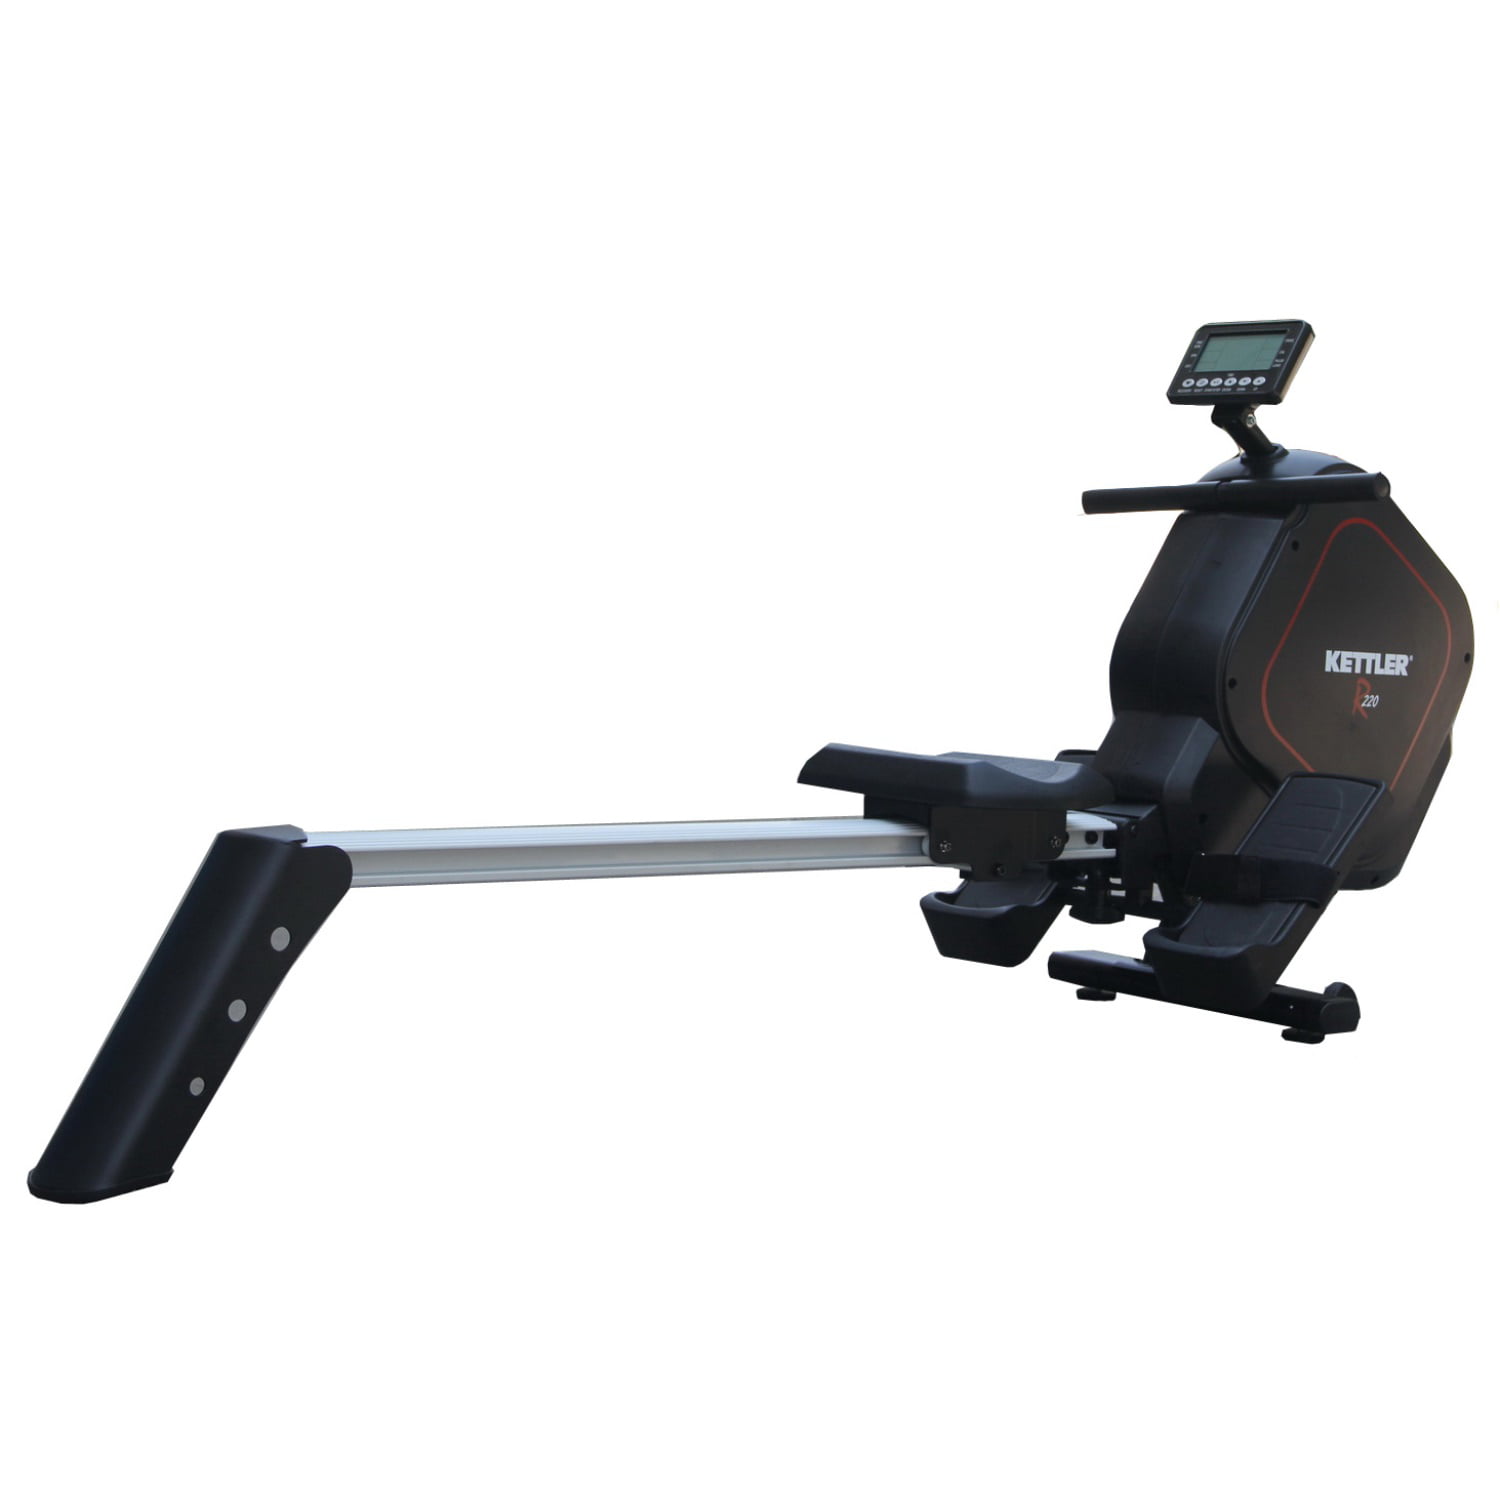 Kettler R220 Programmable Magnetic 16 Balanced Brake Rower Non-Wearing, and System Adjustable with Resistance Level